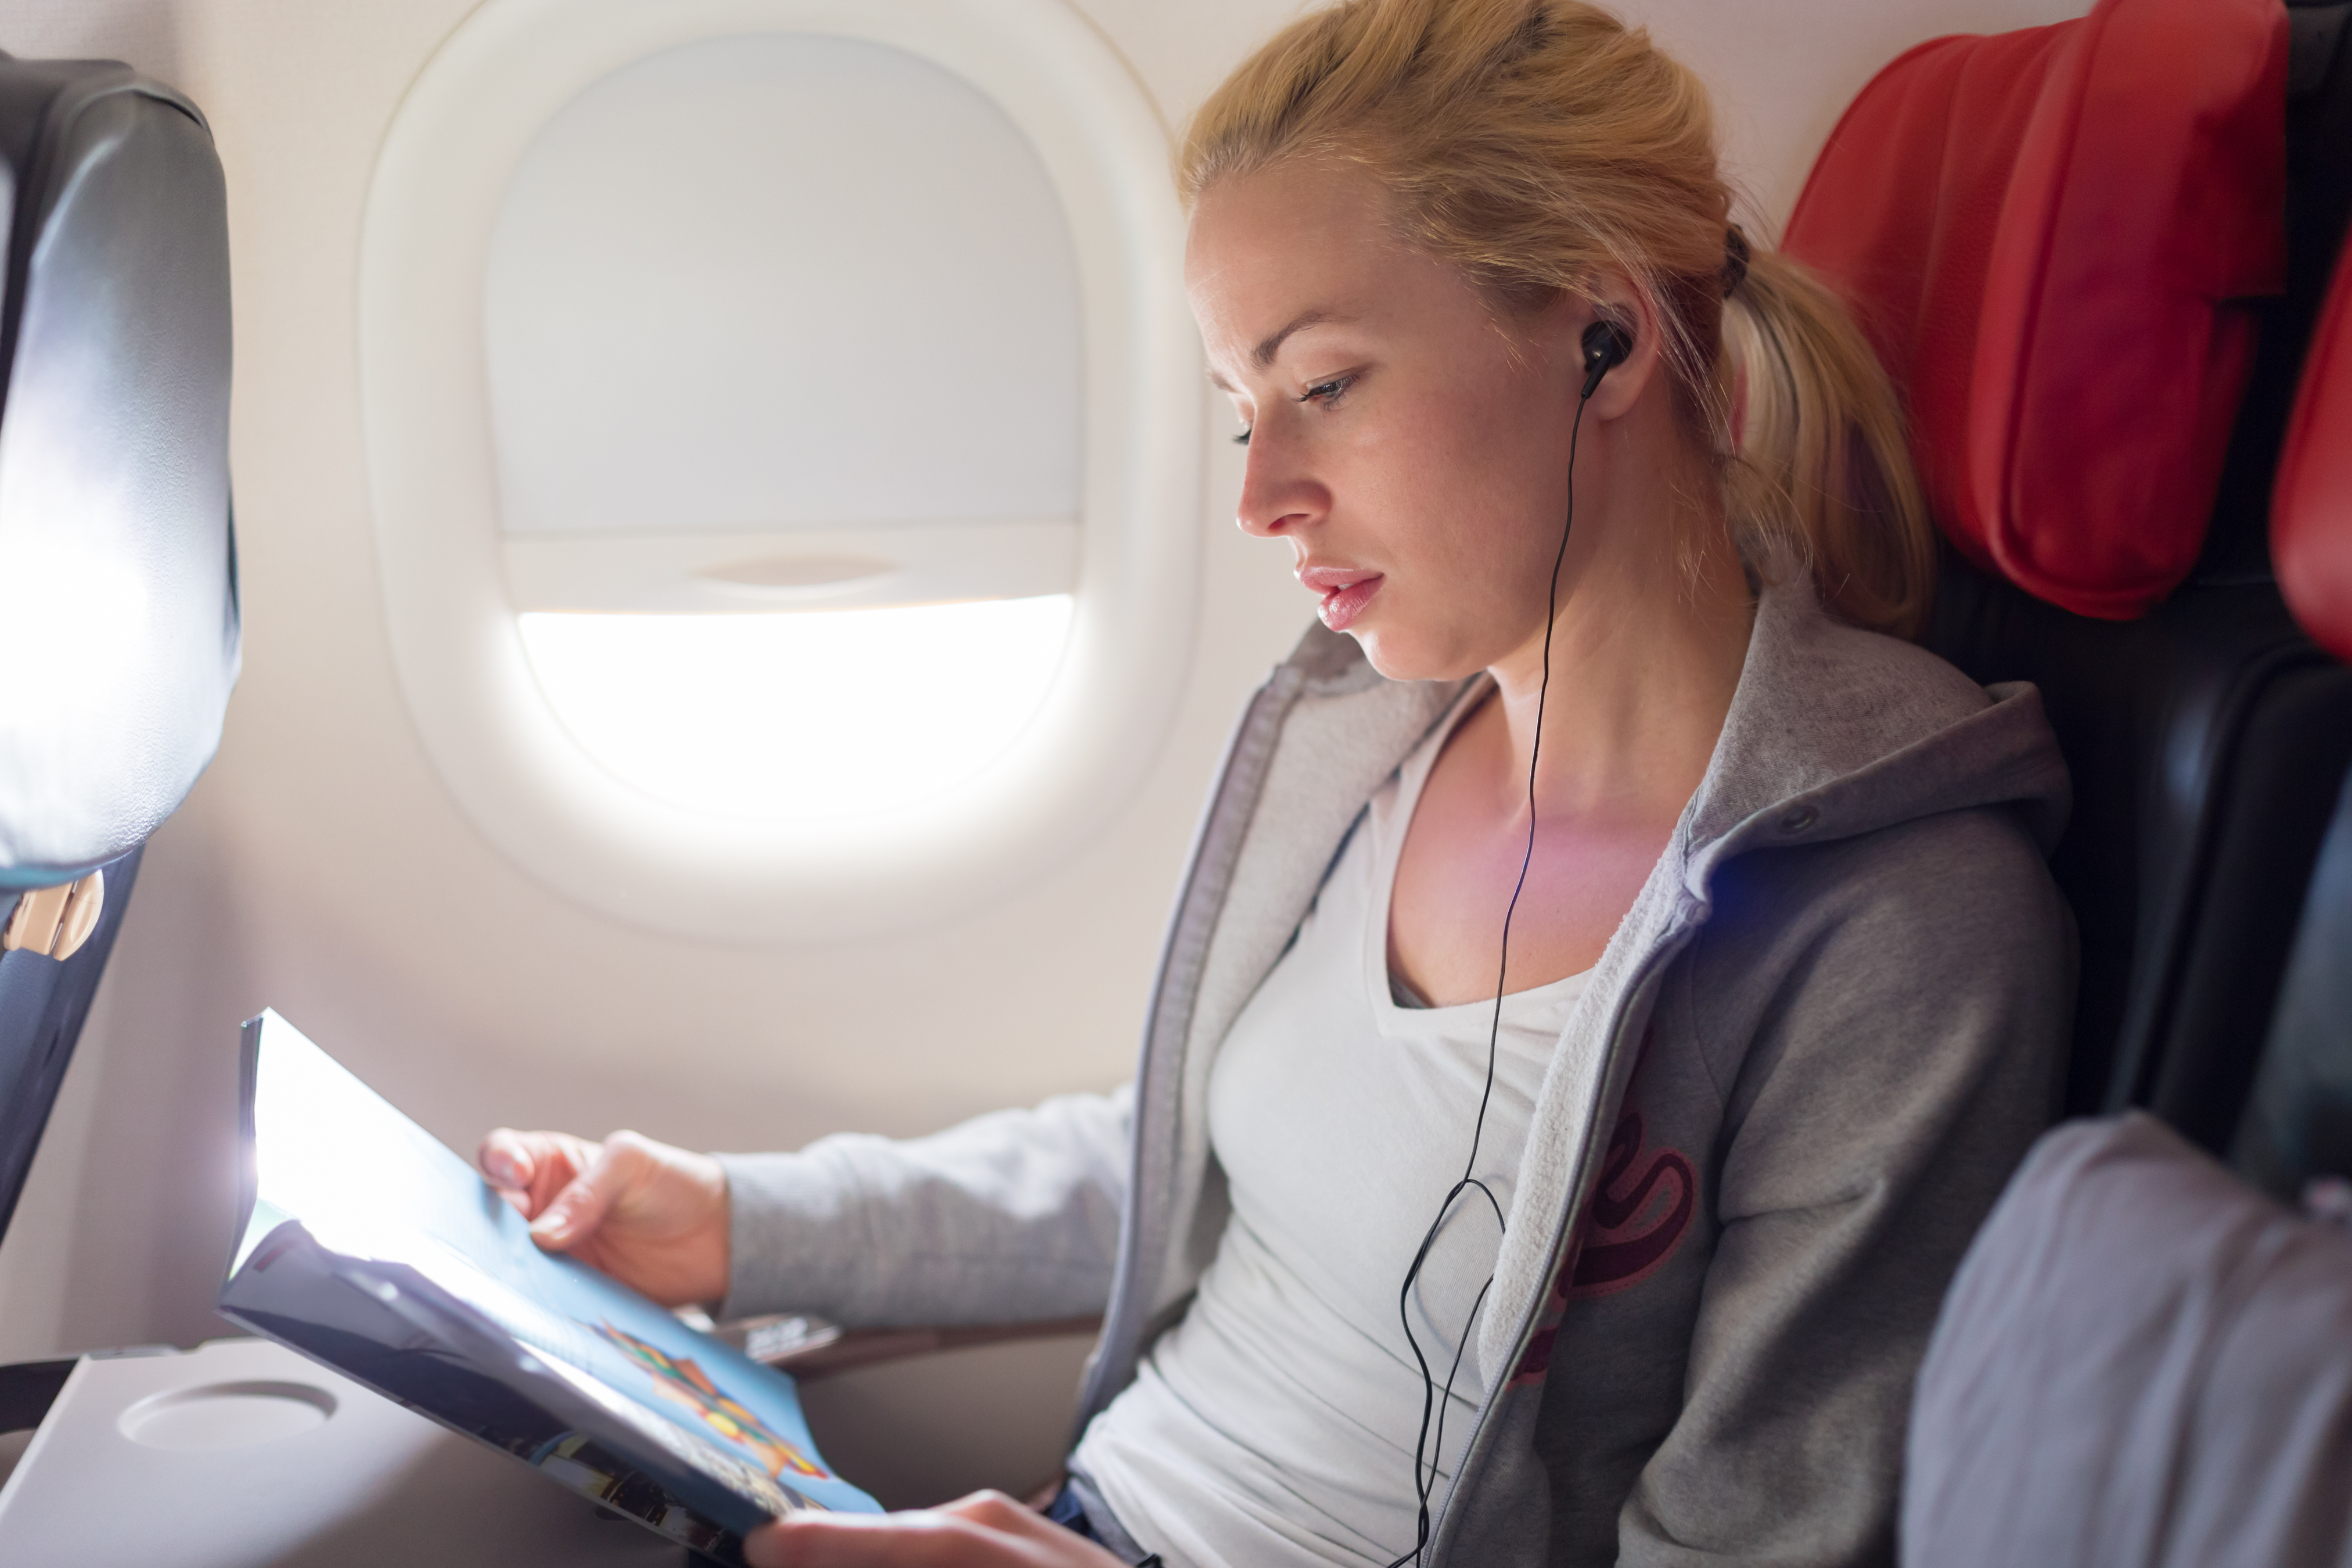 A woman reads a magazine and listens to music on an airplane. | Source: Shutterstock